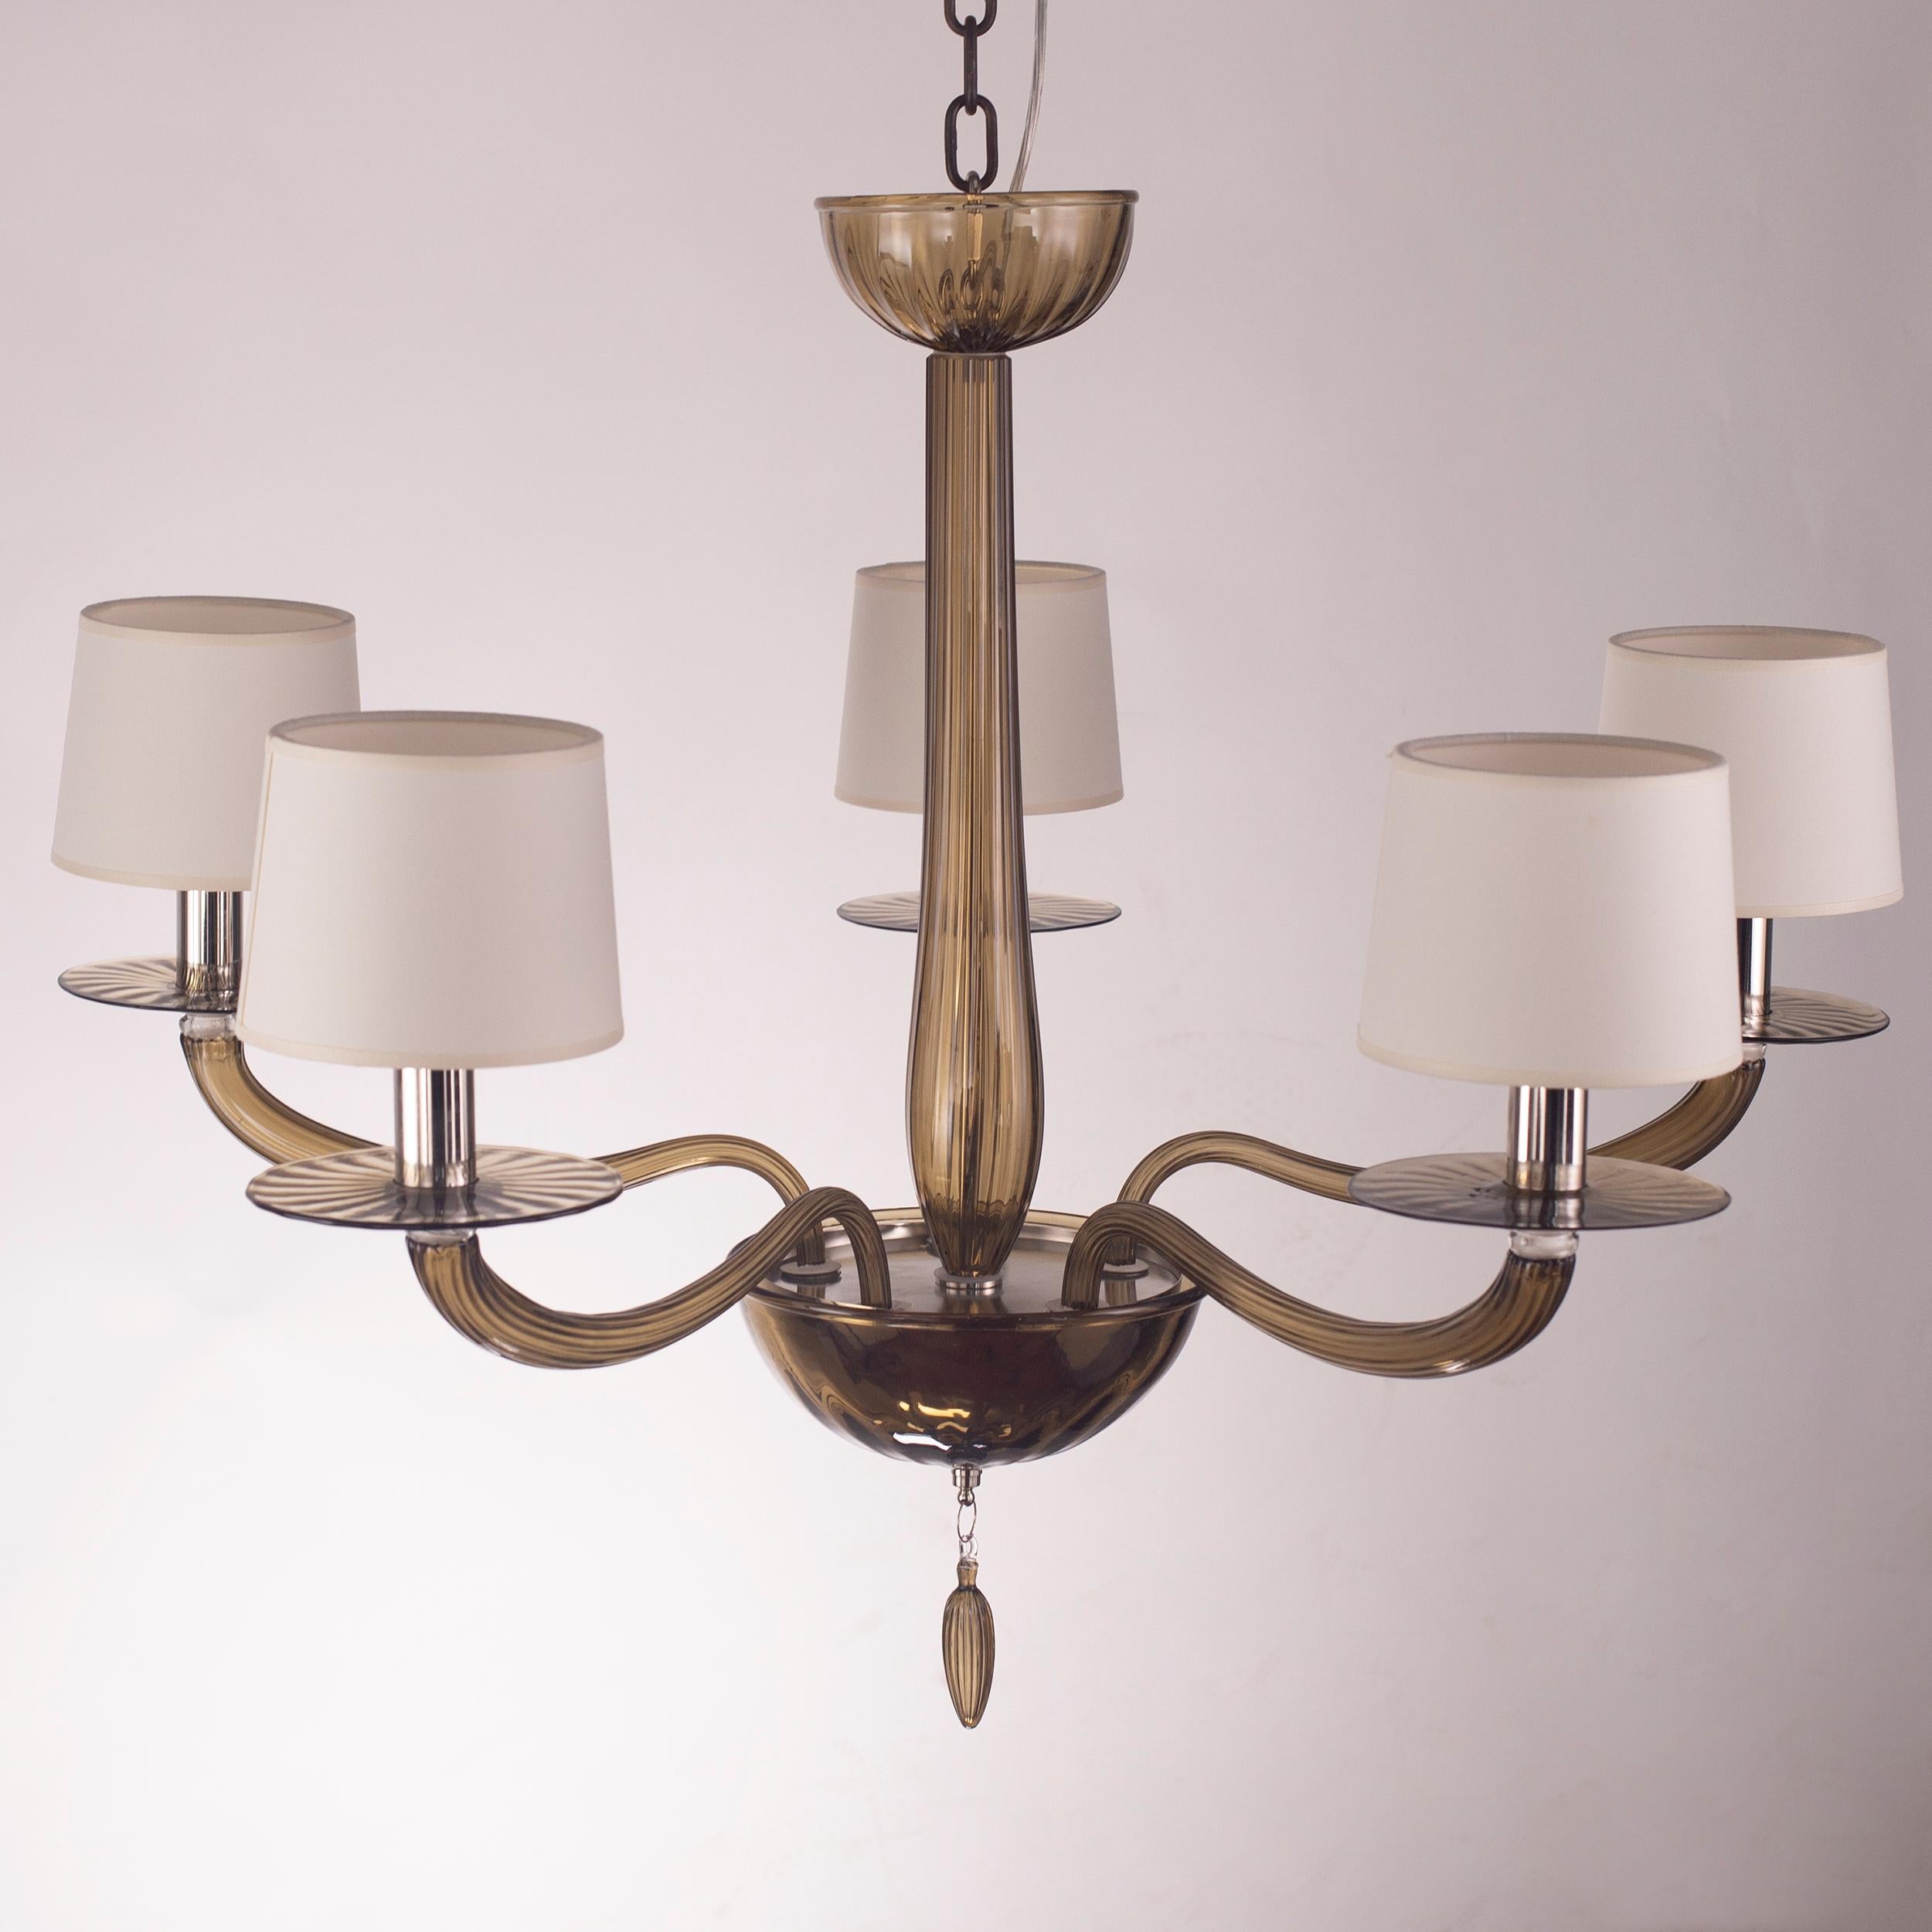 Serenade chandelier 5 Moka Murano glass, white handmade cotton lampshades by Multiforme
Serenade collection is inspired by a contemporary and international design, simple but not banal, and consists of elements studied in minute detail. The perfect